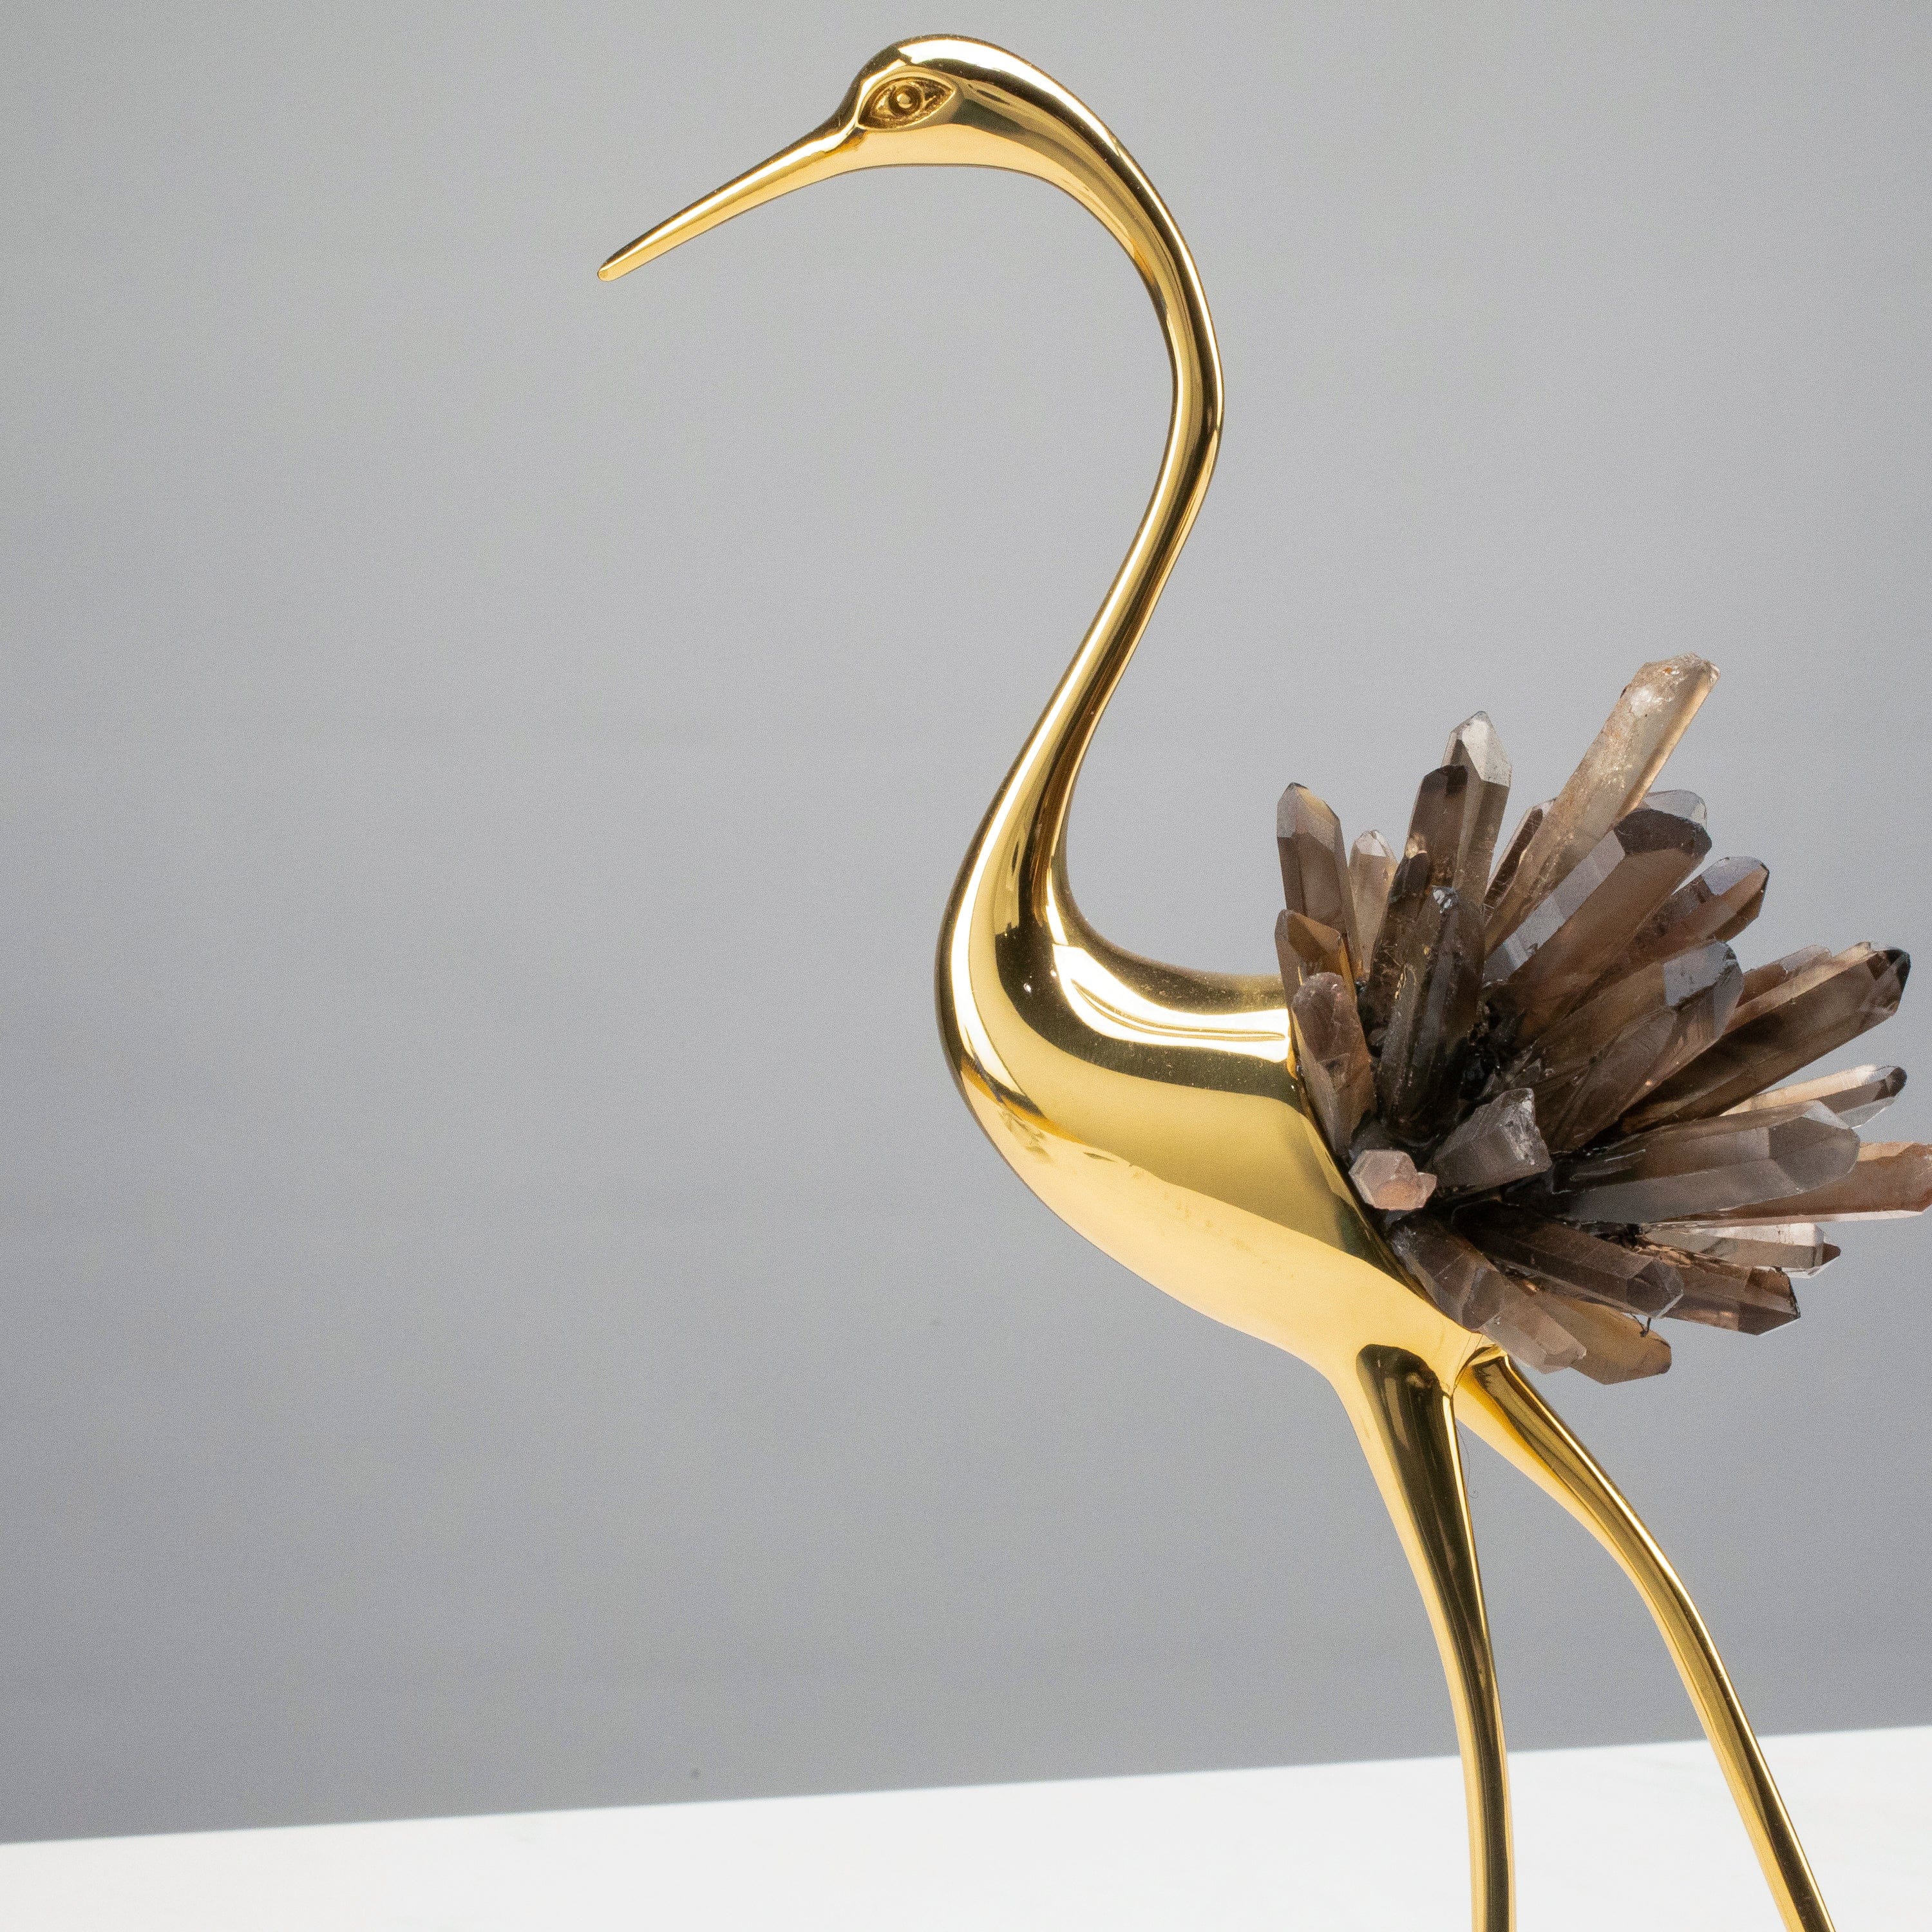 KALIFANO Crystal Home Decor Brass Flamingo with Smoky Quartz Cluster on Marble Stand HG1343B-SQ